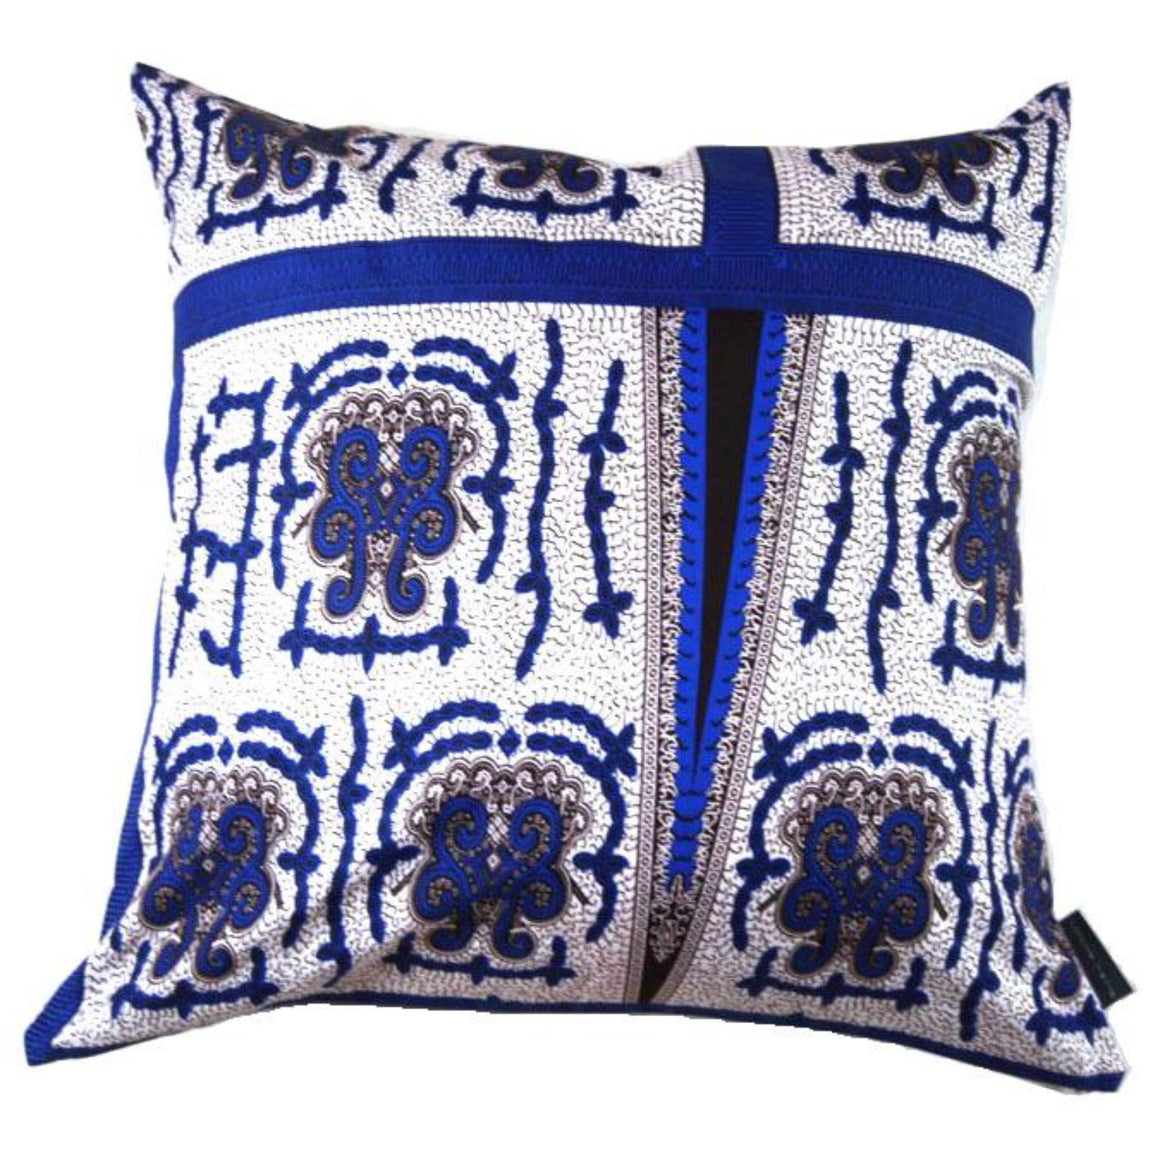 Chioma - Blue and White African Print Pillow Cover - 22x22